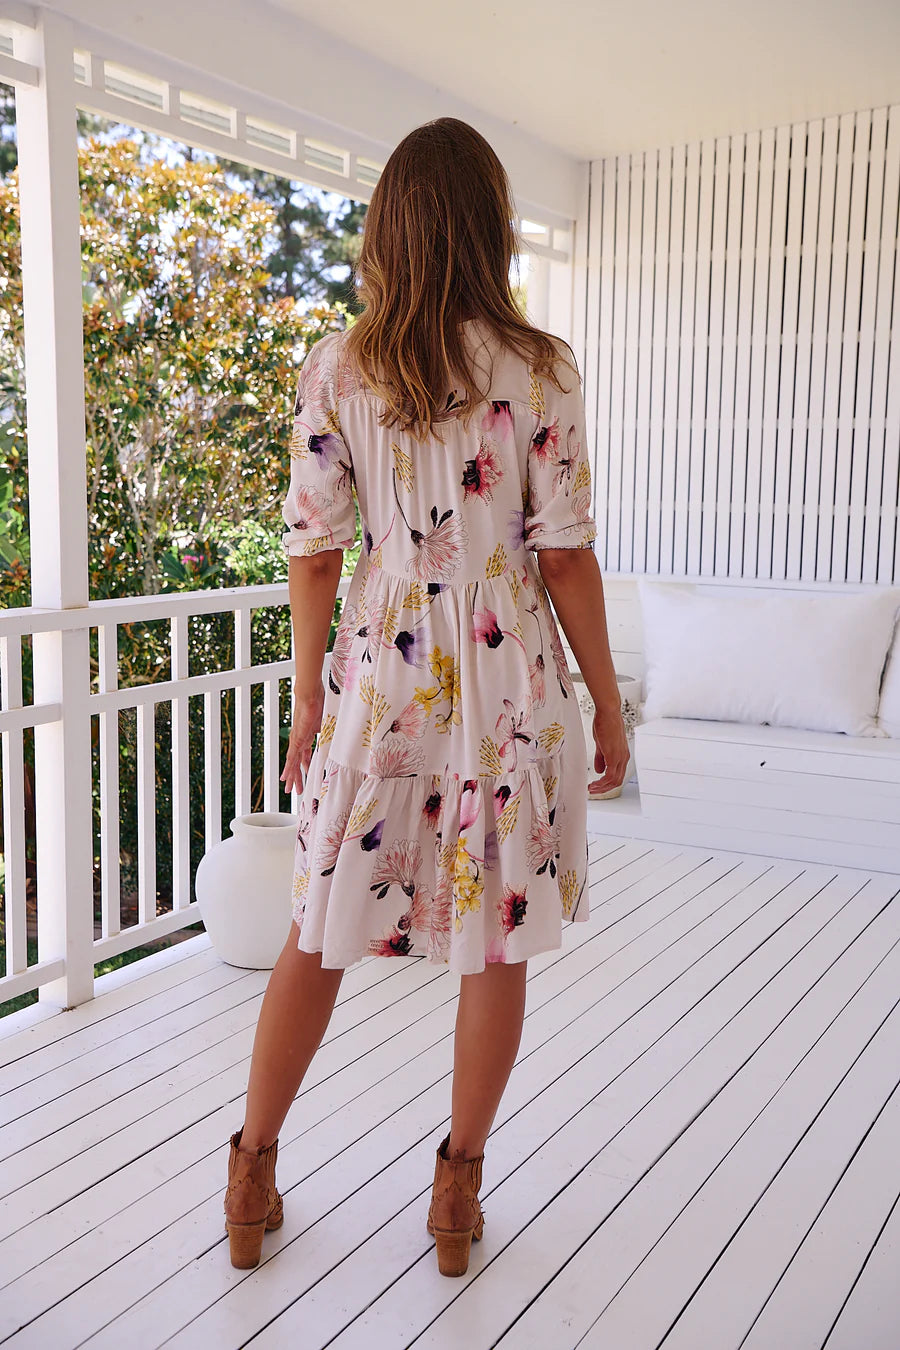 Unleash your inner fashionista with the Finch Mini Dress in Julietta Print. This playful dress features a trendy V-neck, buttoned bodice, and short sleeves. With a waist tie and frilled hem, it's perfect for a day out on the town. (Seriously, you'll look amazing!)